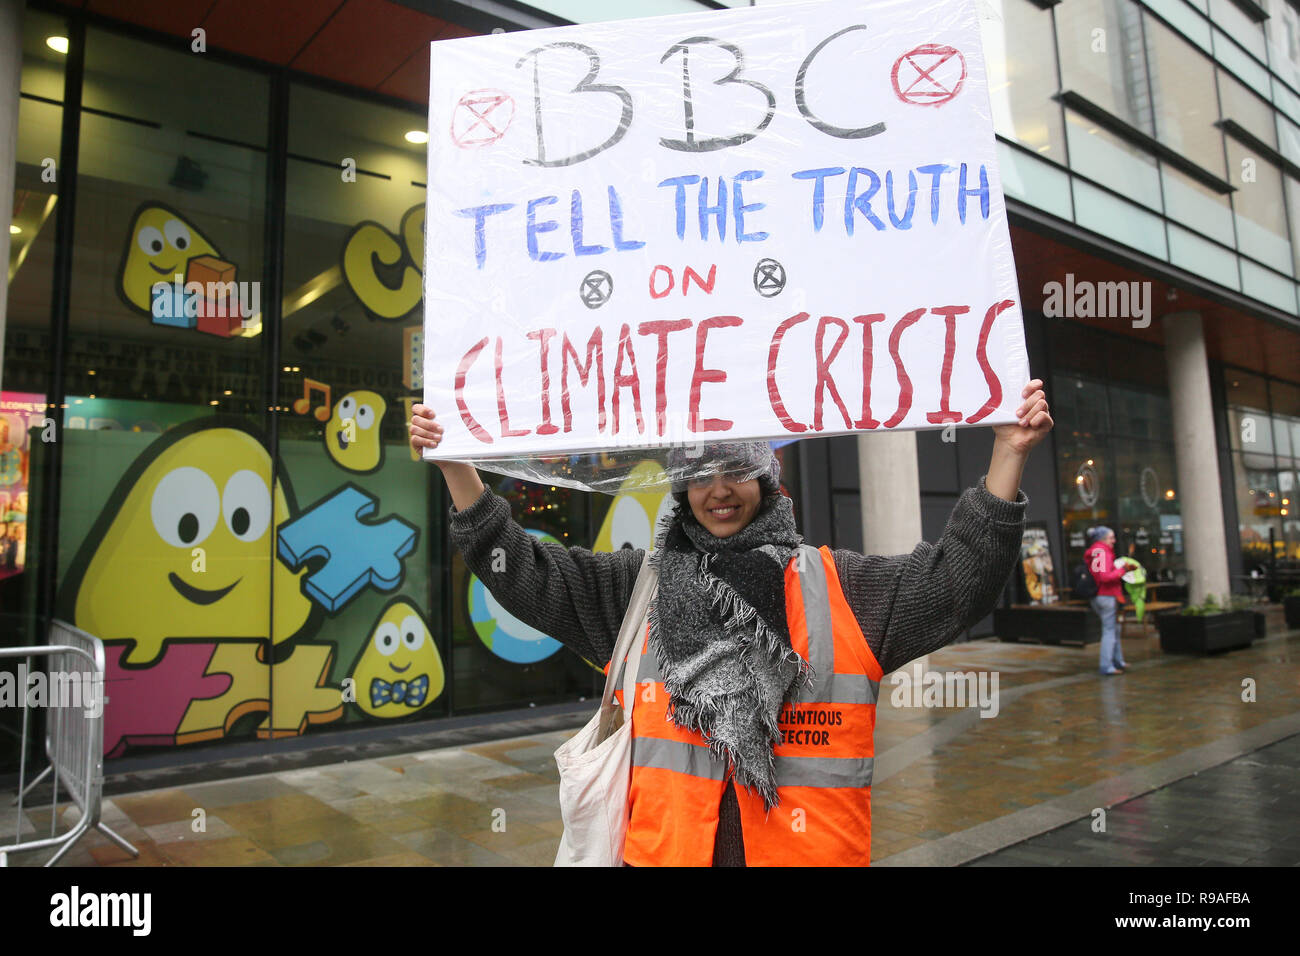 Salford, UK. 21st Dec, 2018. An Extinction Rebellion campaigner holding a placard which reads "BBC Tell The Truth on Climate Change". BBC, Media City, Salford, UK, 21st December 2018 (C)Barbara Cook/Alamy Live News Credit: Barbara Cook/Alamy Live News Stock Photo